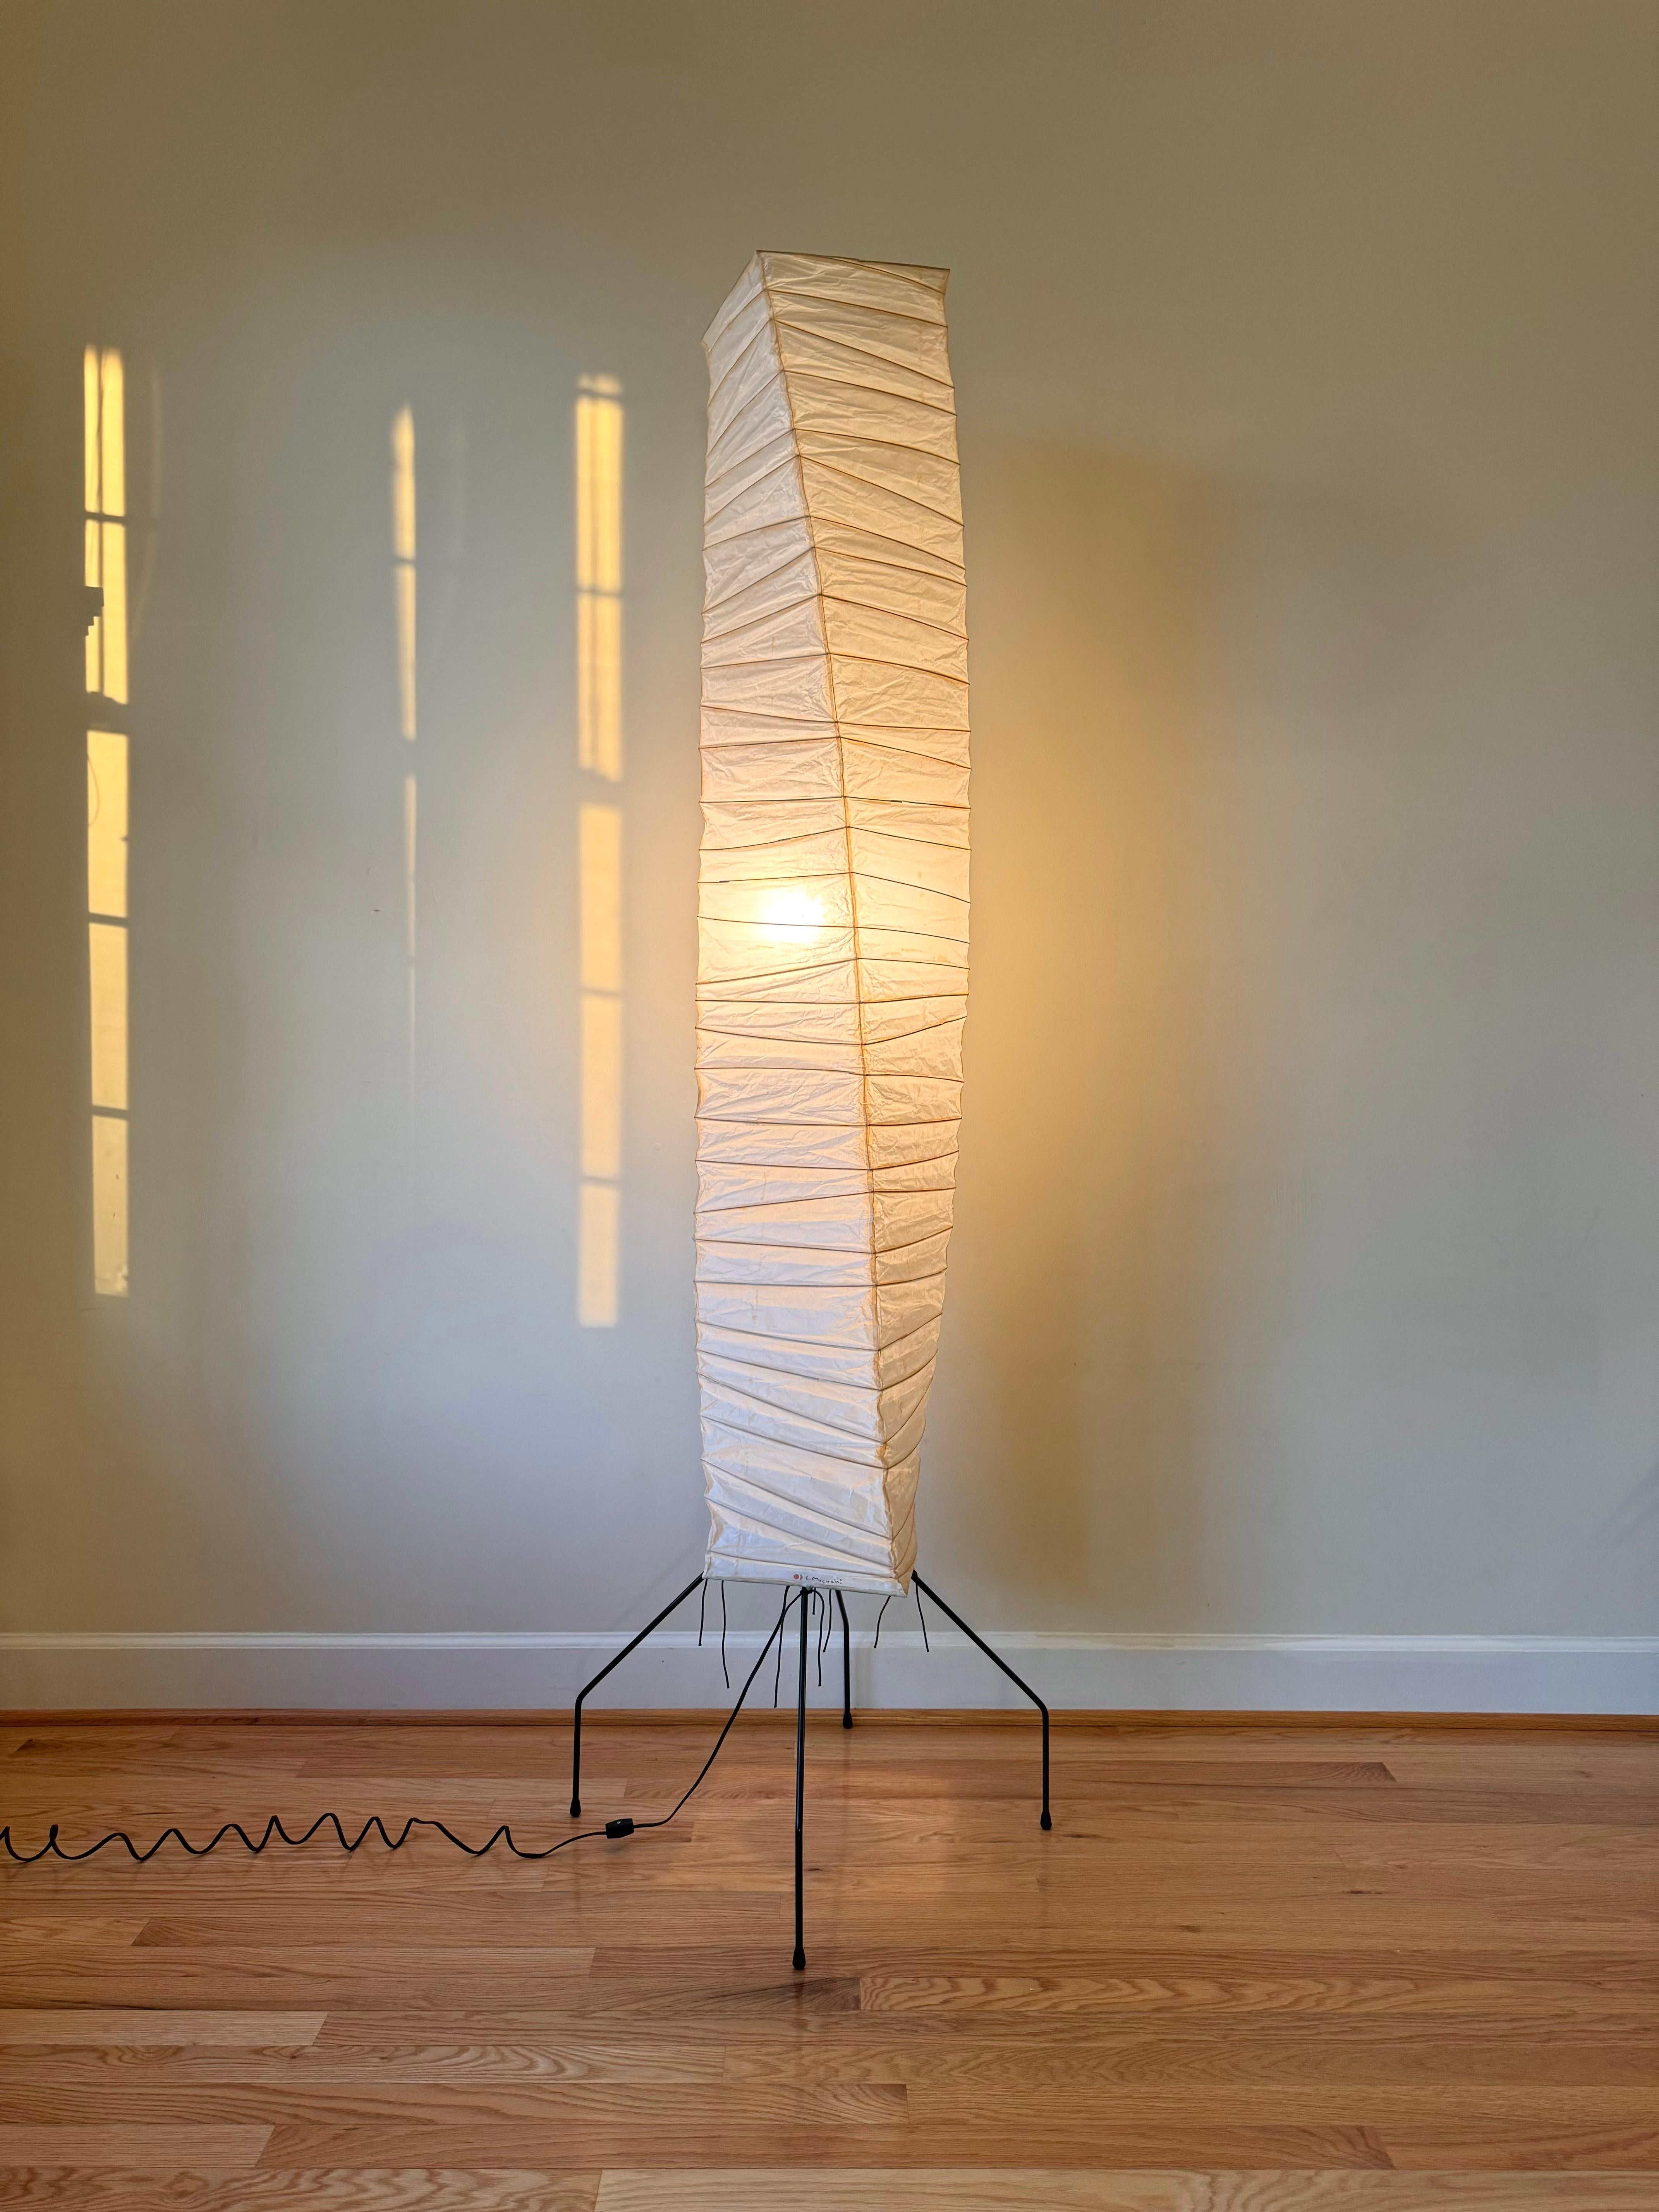 Akari Light Sculptures by Isamu Noguchi are considered icons of 1950s modern design. Designed by Noguchi beginning in 1951 and handmade for a half century by the original manufacturer in Gifu, Japan, the paper lanterns are a harmonious blend of